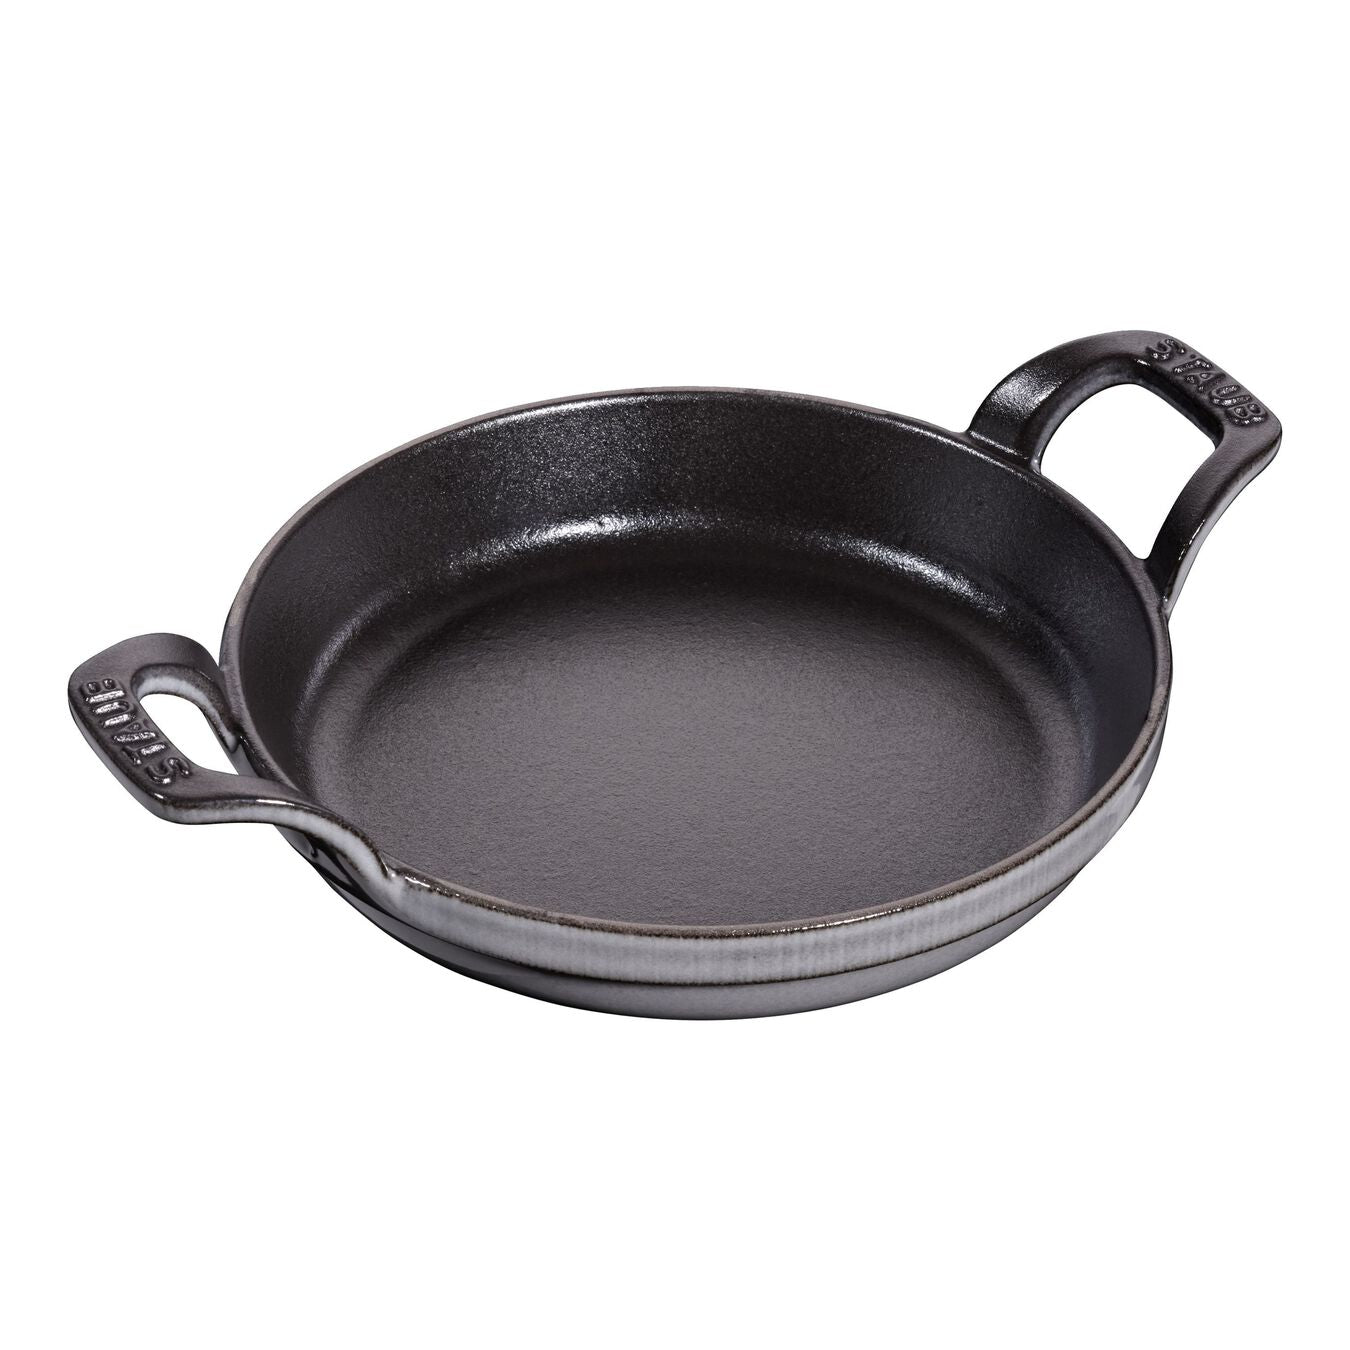 Staub Enameled Cast Iron Daily Pan with Glass Lid in Graphite Grey